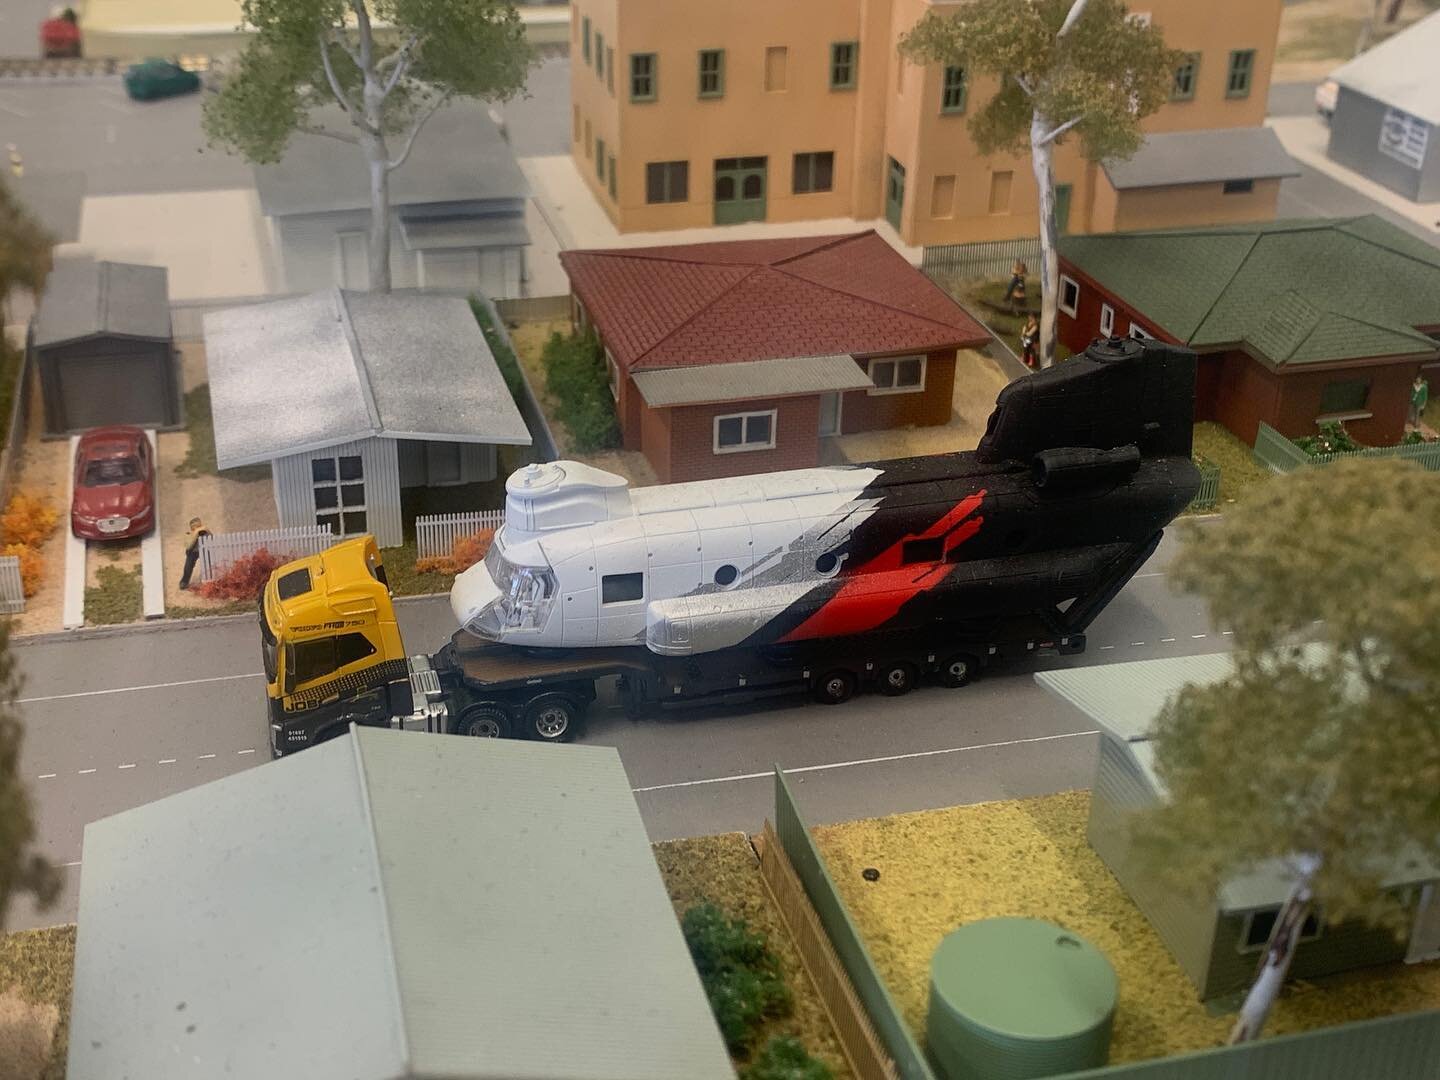 #Chinook firefighting helicopter makes its way slowly down the street #modeltrains #nscale #modelrailway #modelrailroad